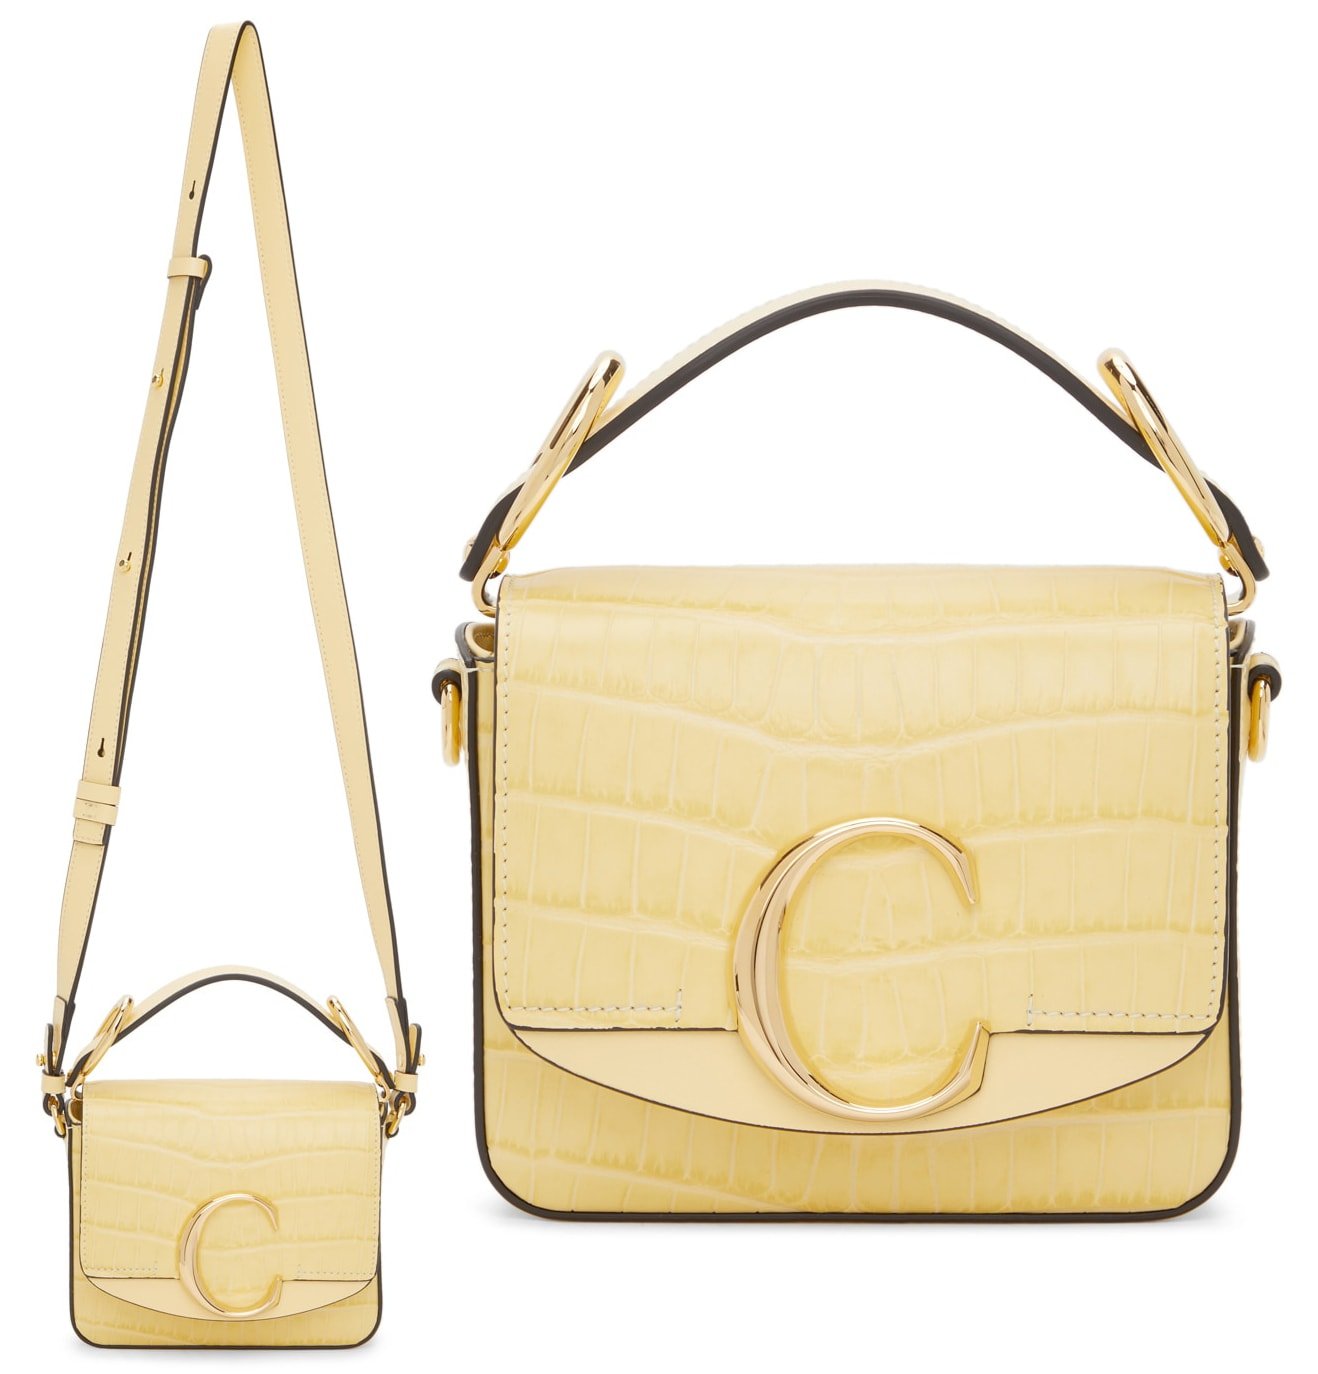 The Chloe C bag features the C logo hardware set on the fold-over flap